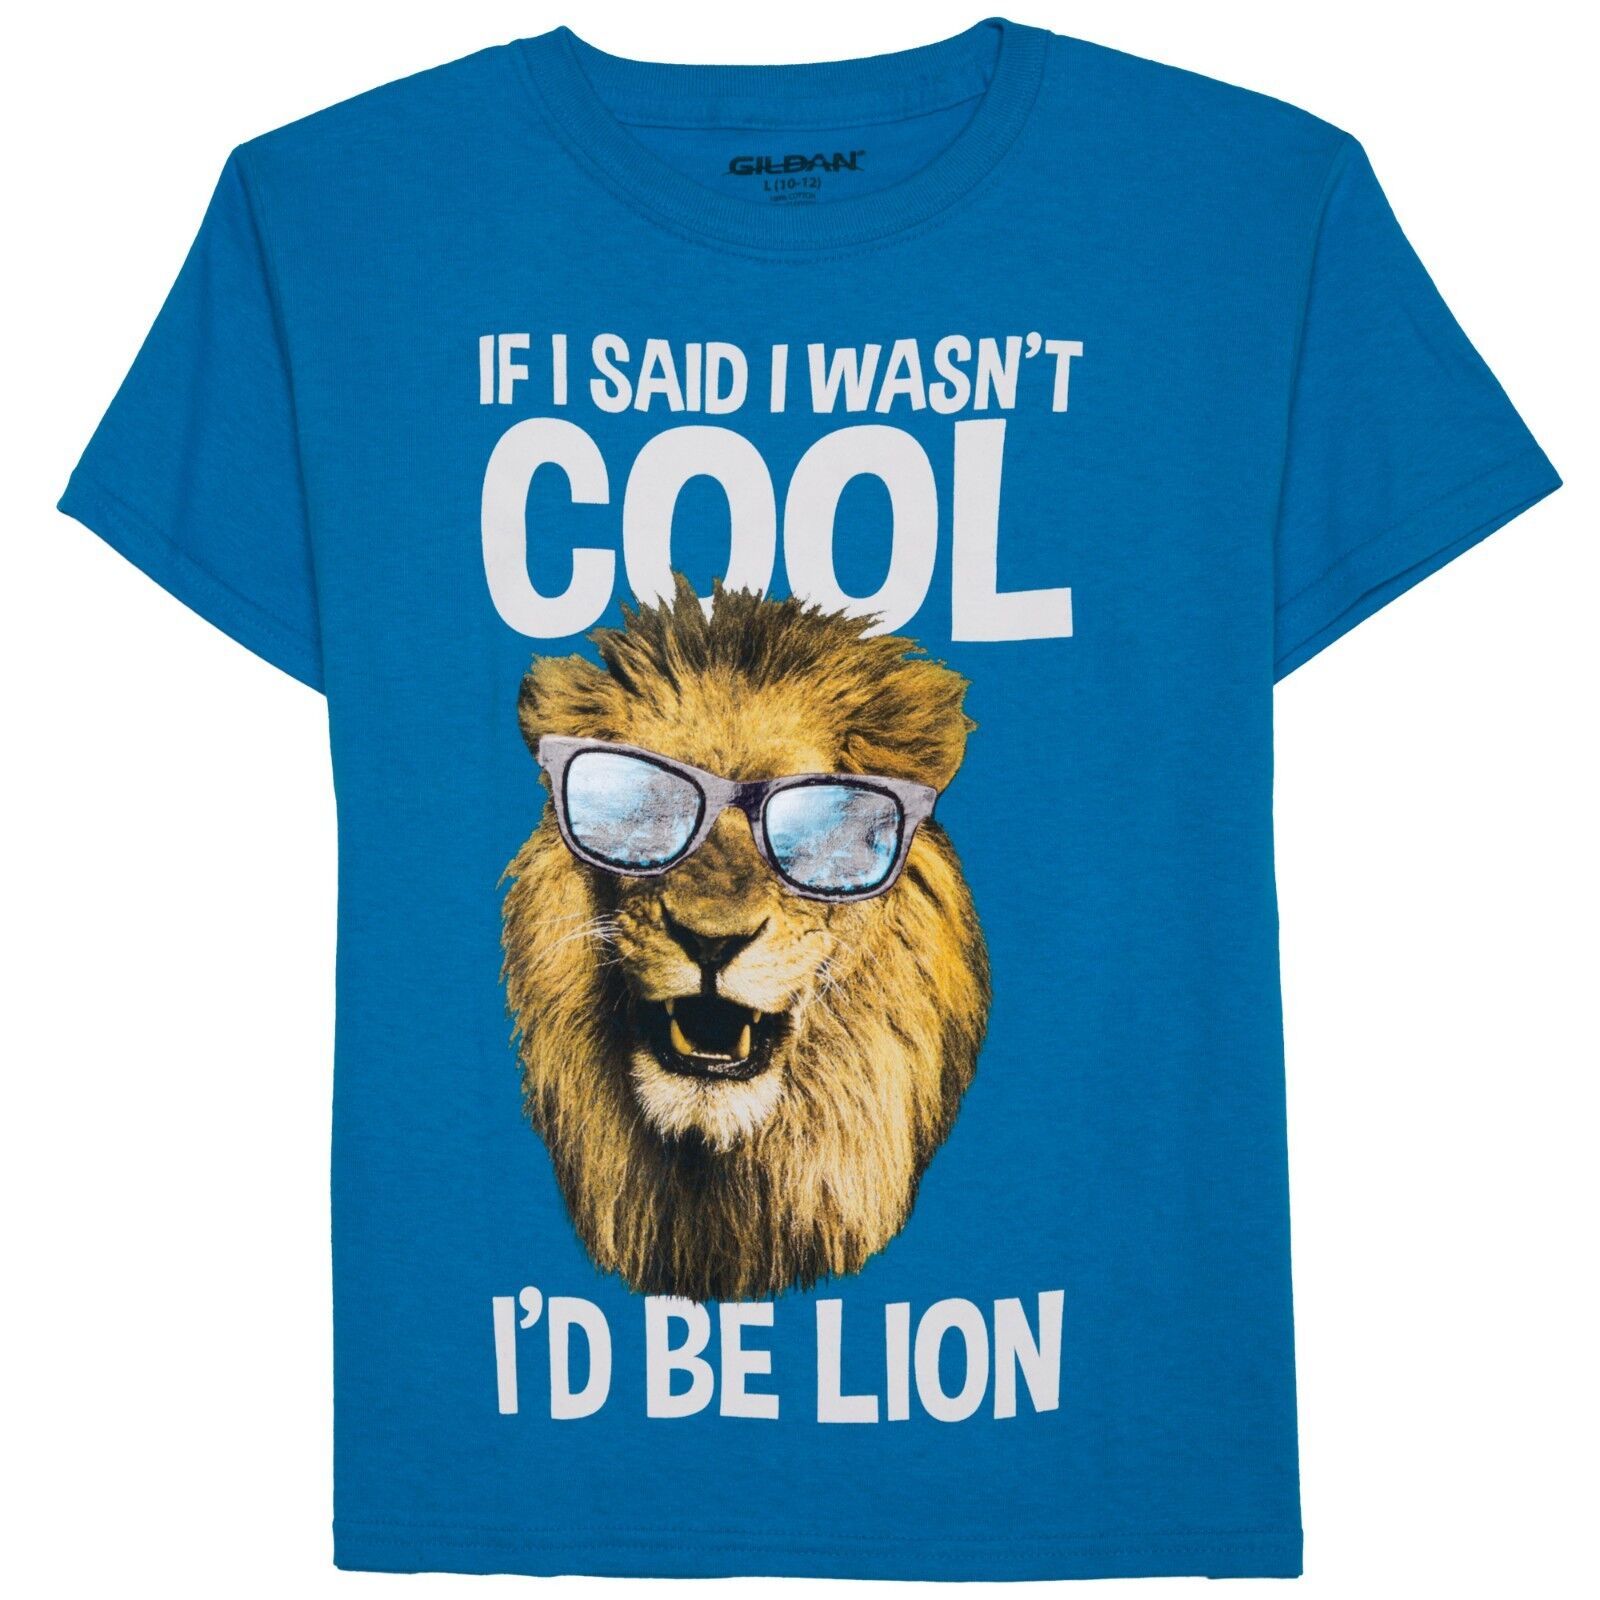 Primary image for Gildan Boy's T Shirt If I Said I Wasn't Cool I Would Be Lion Size Small Blue